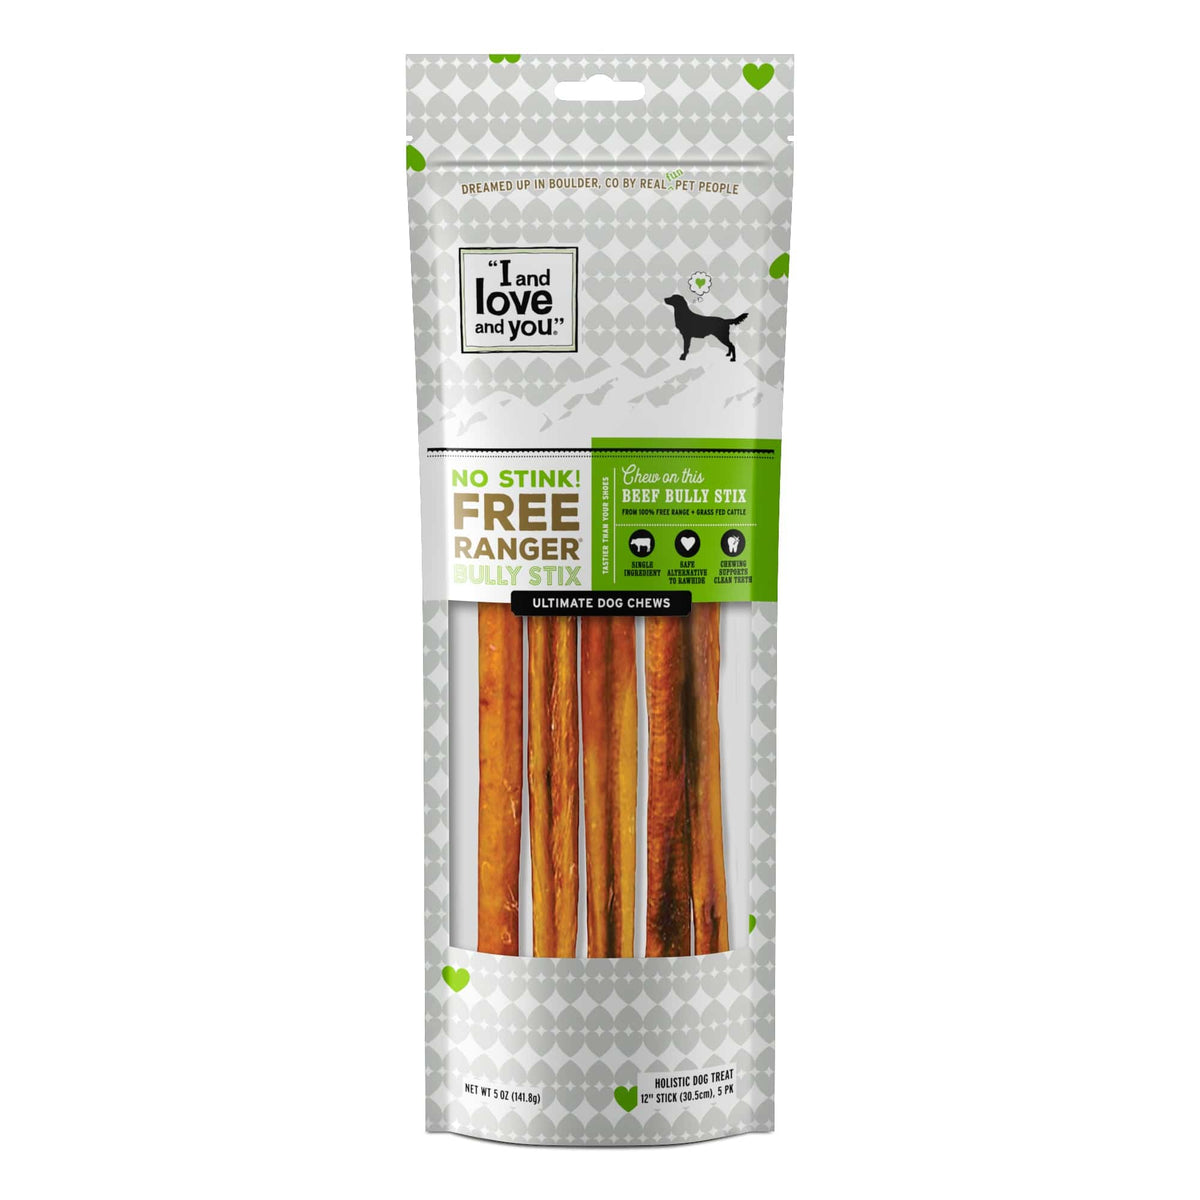 No Stink! Free Ranger Bully Stix 12 package with dog treats, chews, sticks, and label.